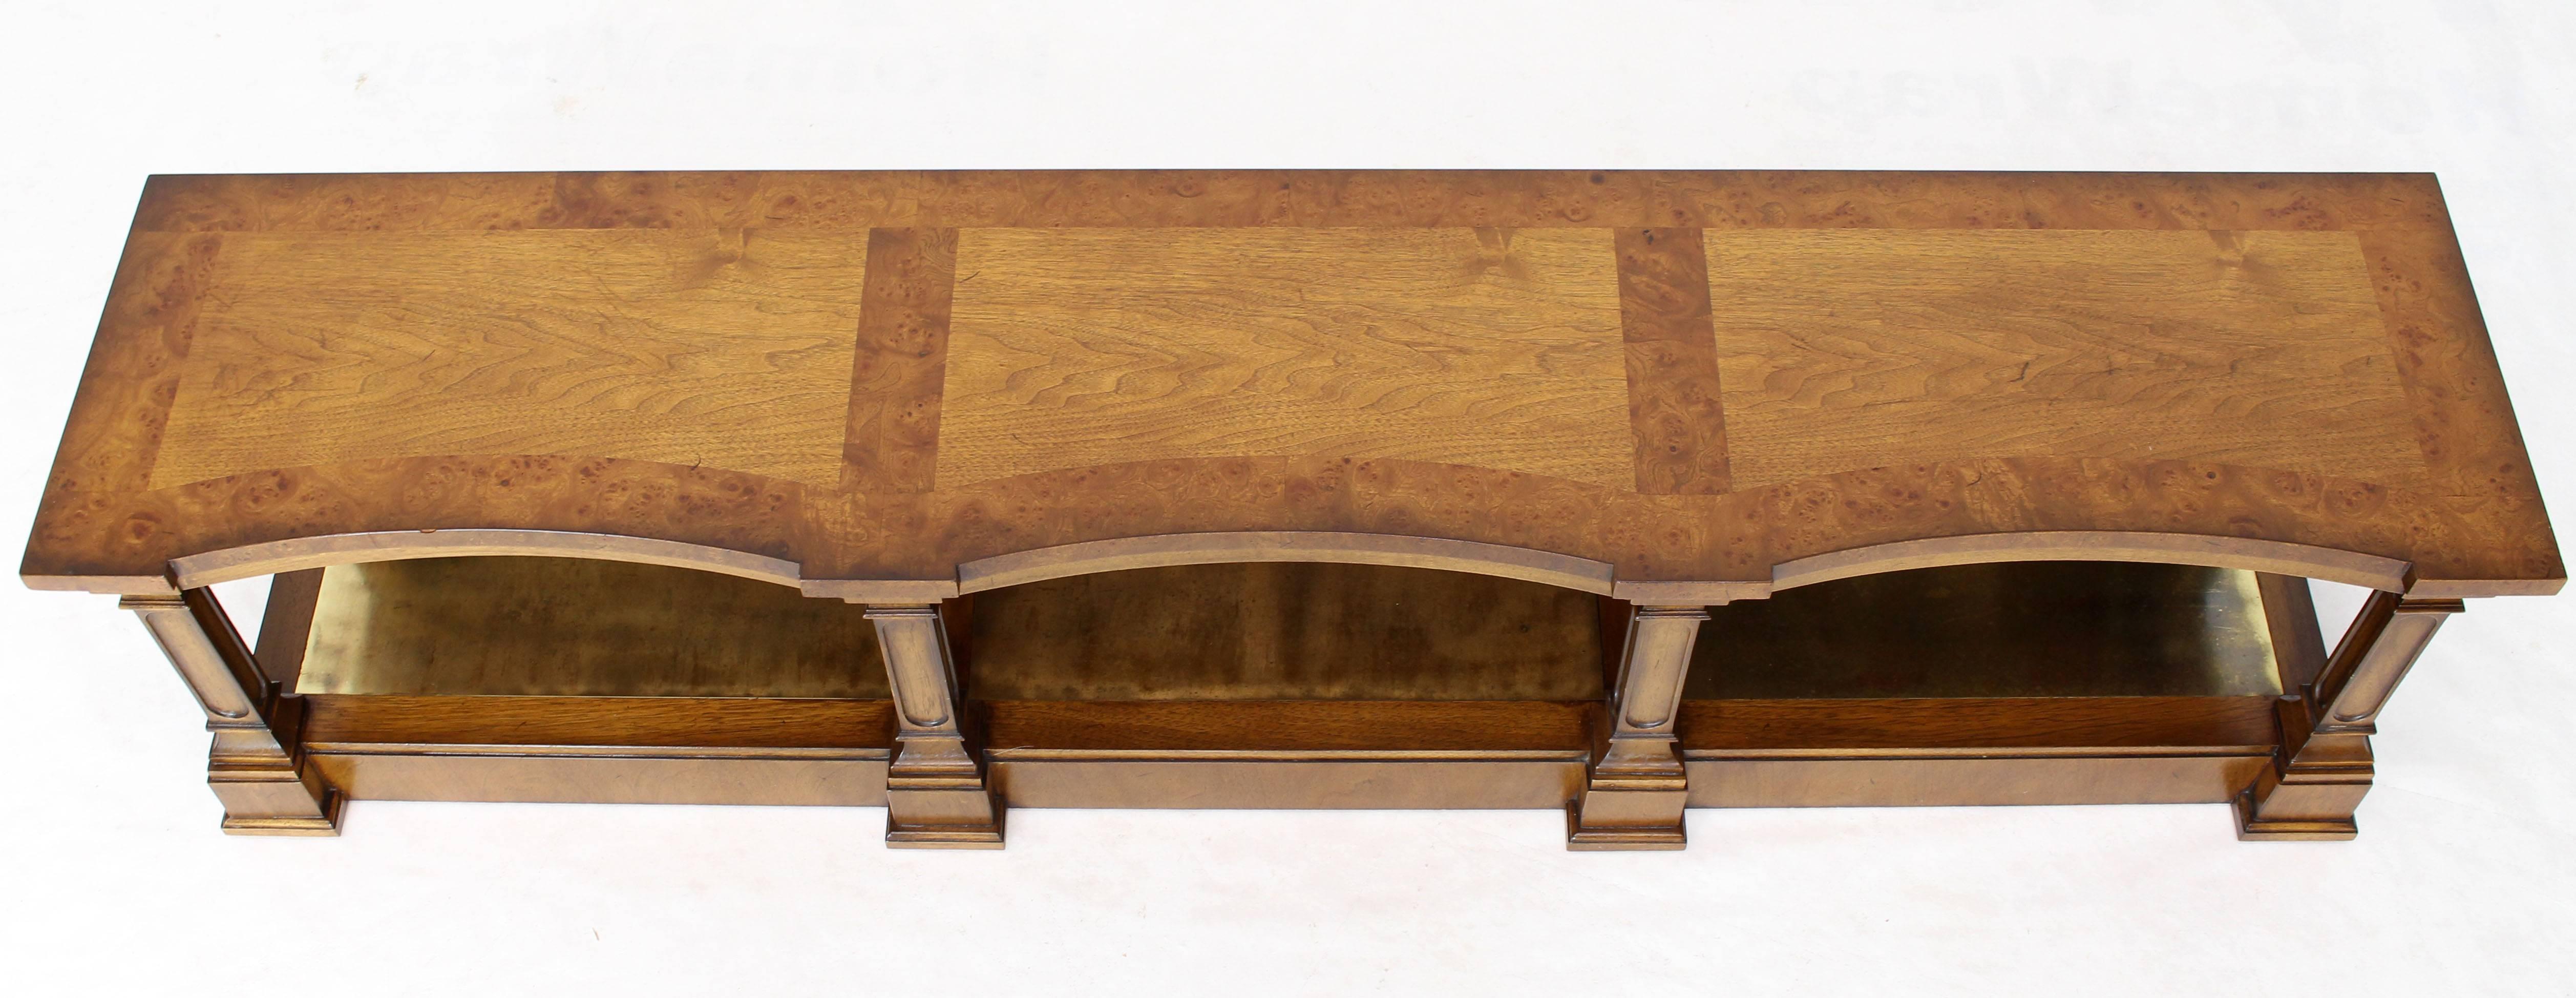 Mid-Century Modern Low Profile Burl Wood Banded Credenza Display Bench or Table with Brass Shelf